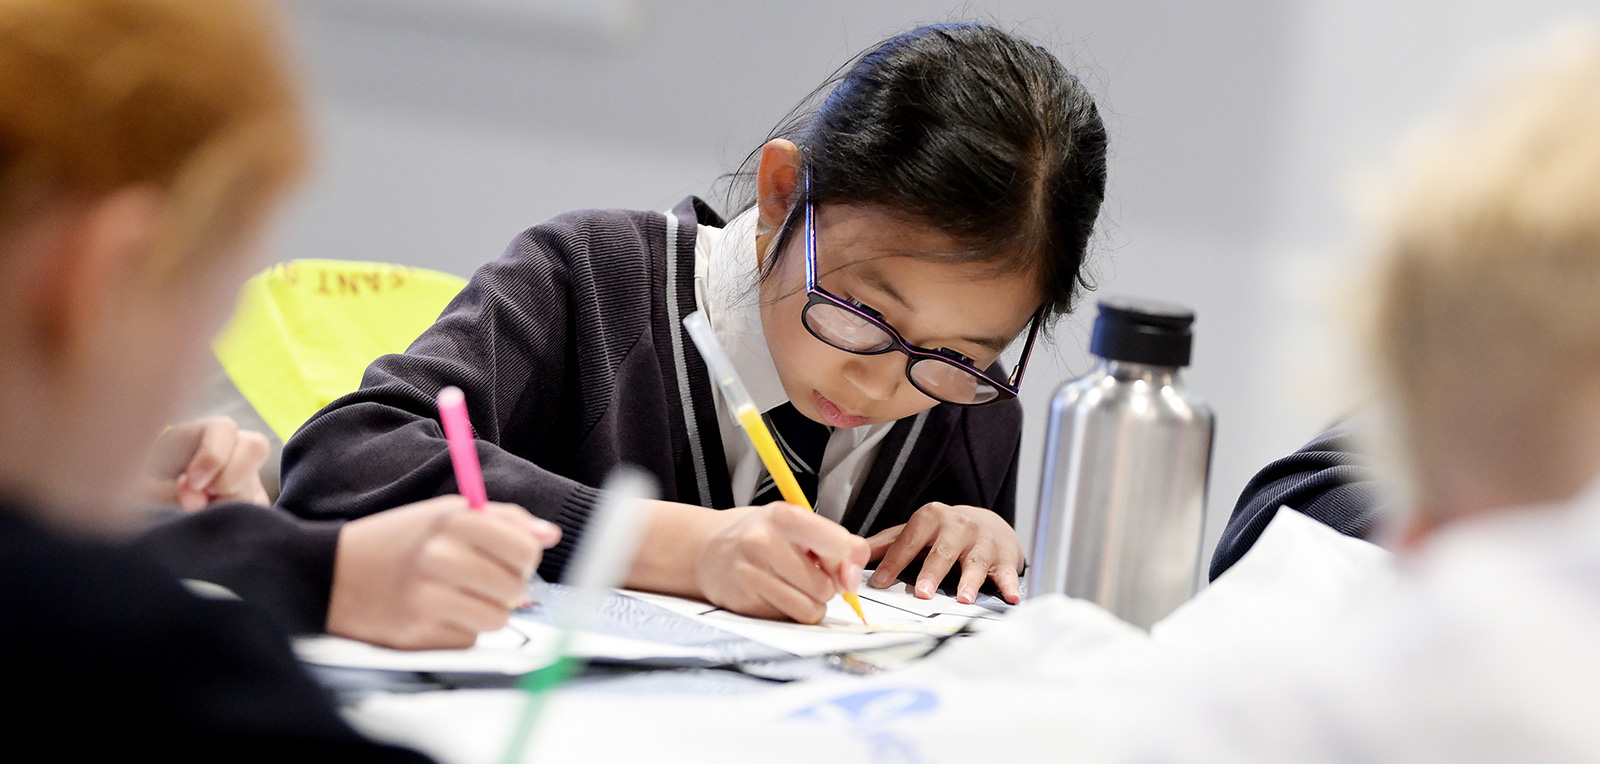 A school pupil holding a felt tip pen at a desk and working